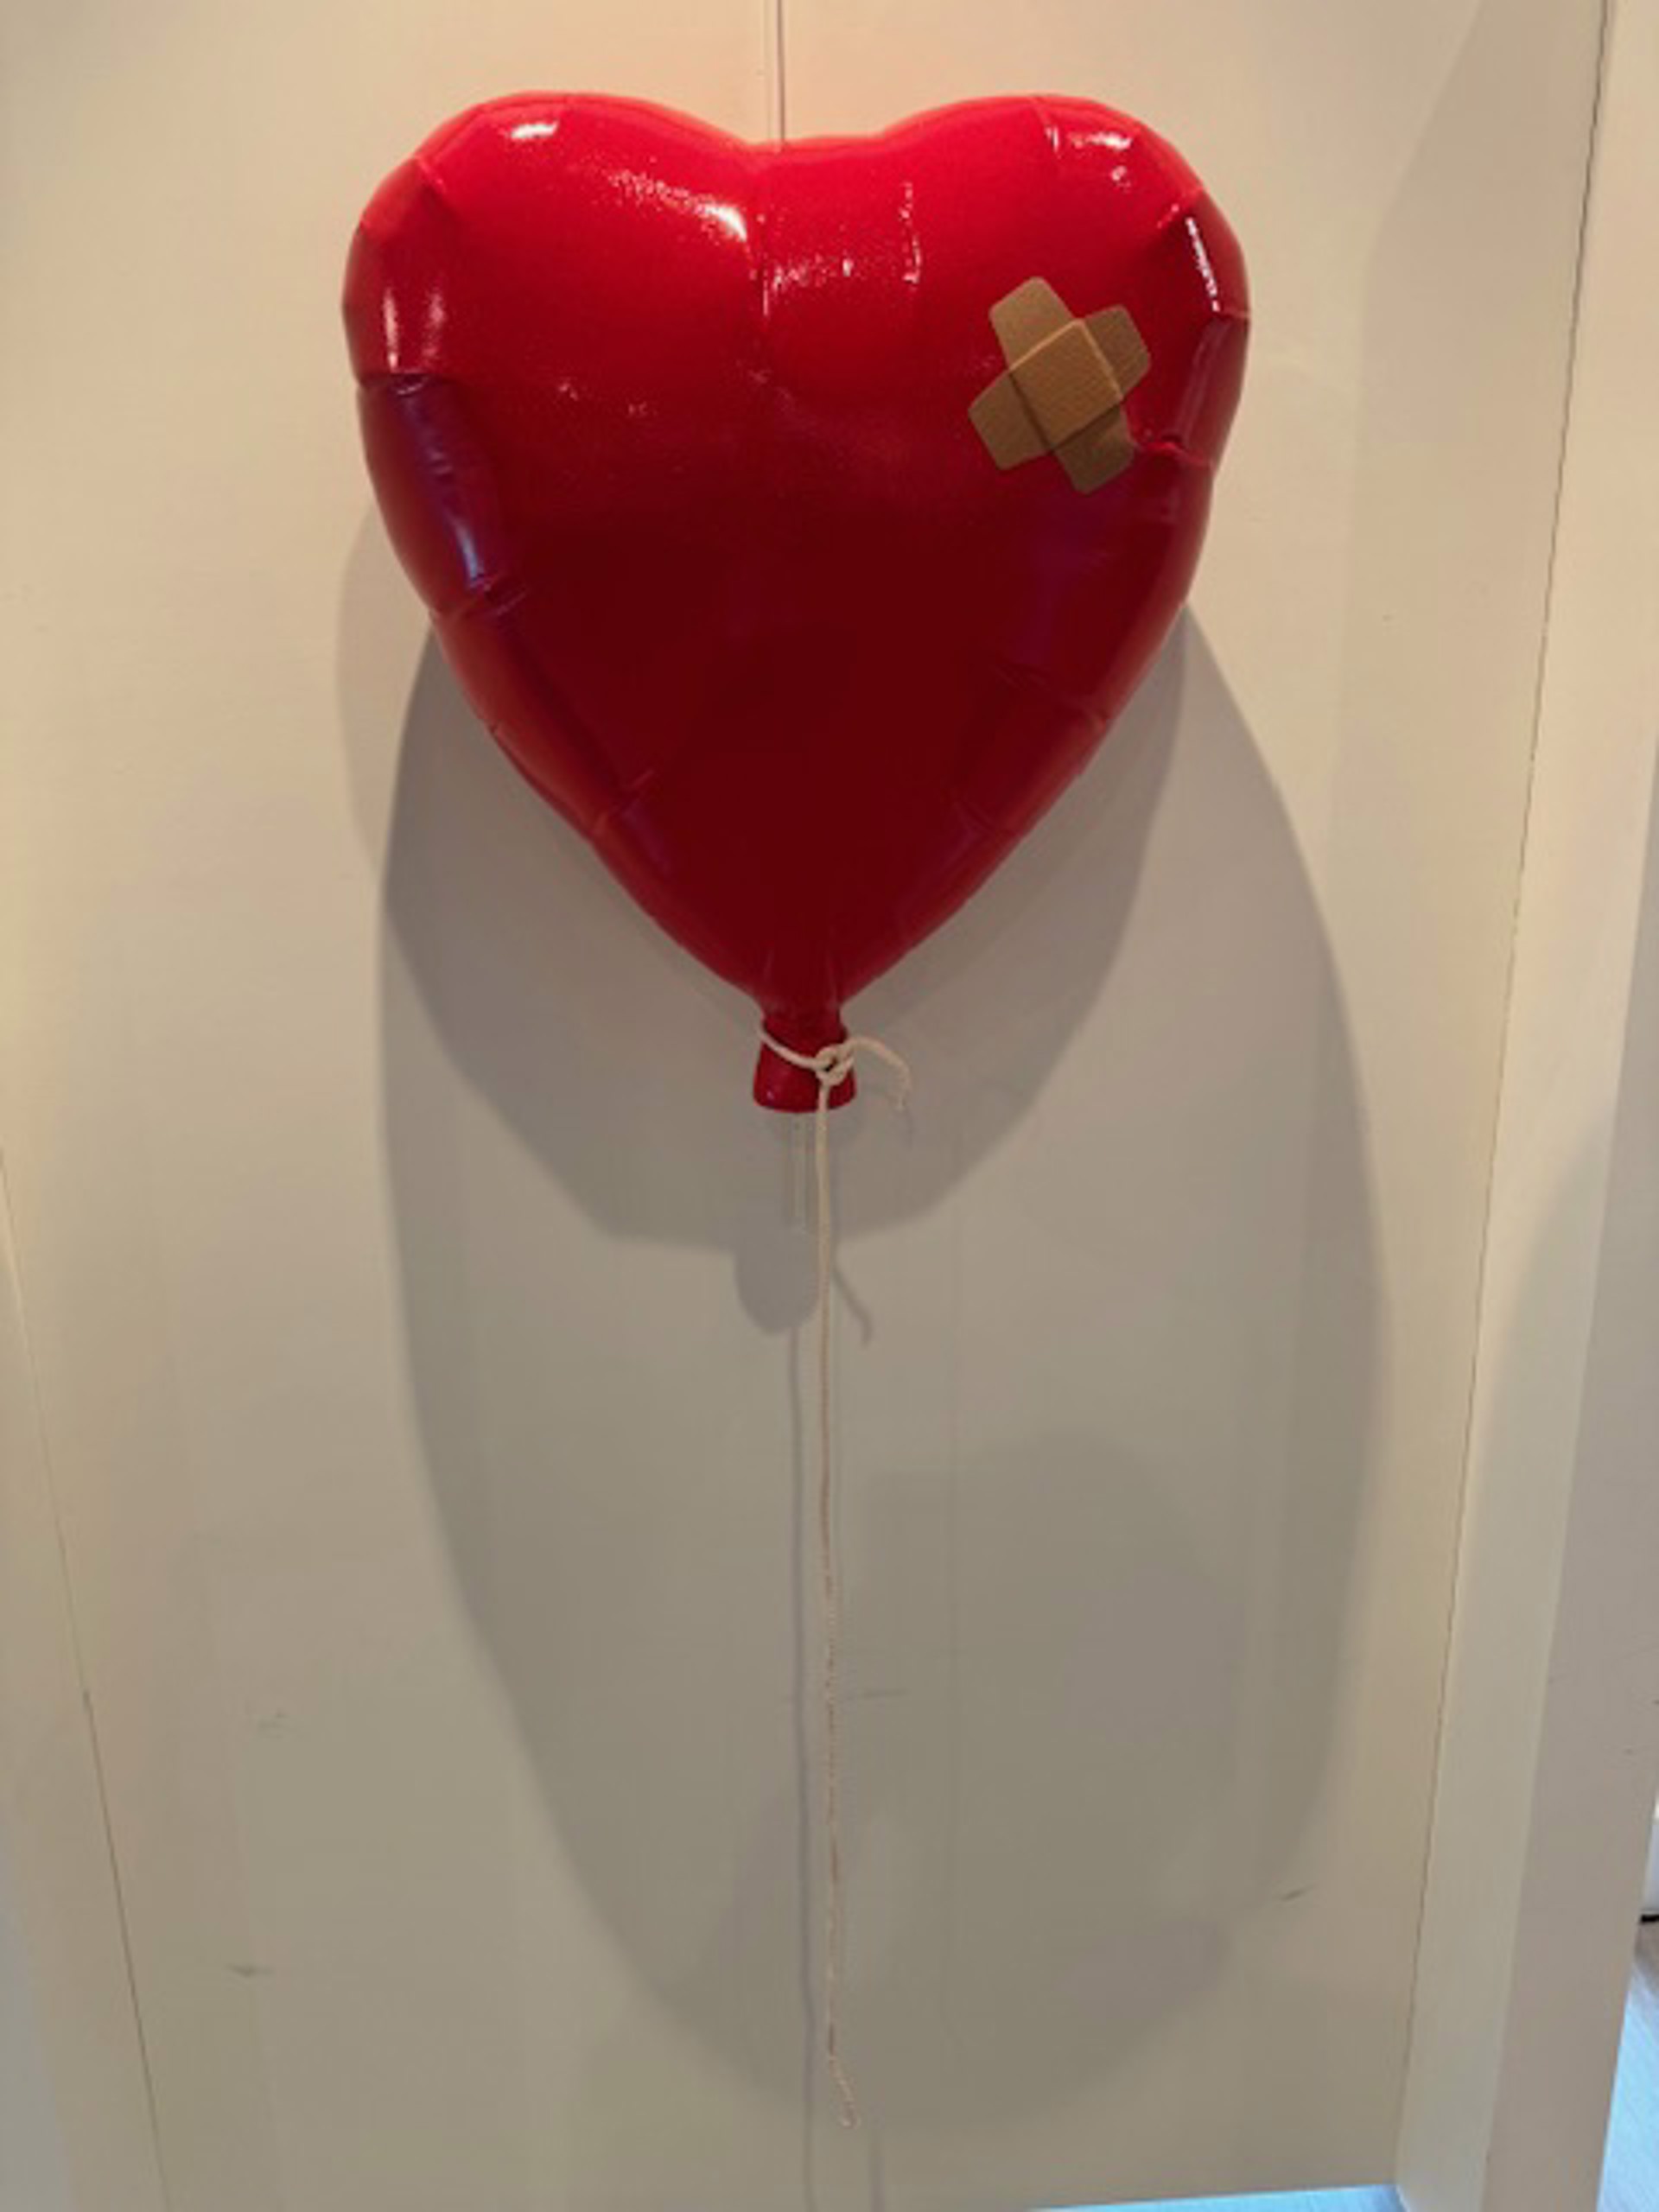 Band Aid Balloon by Plastic Jesus